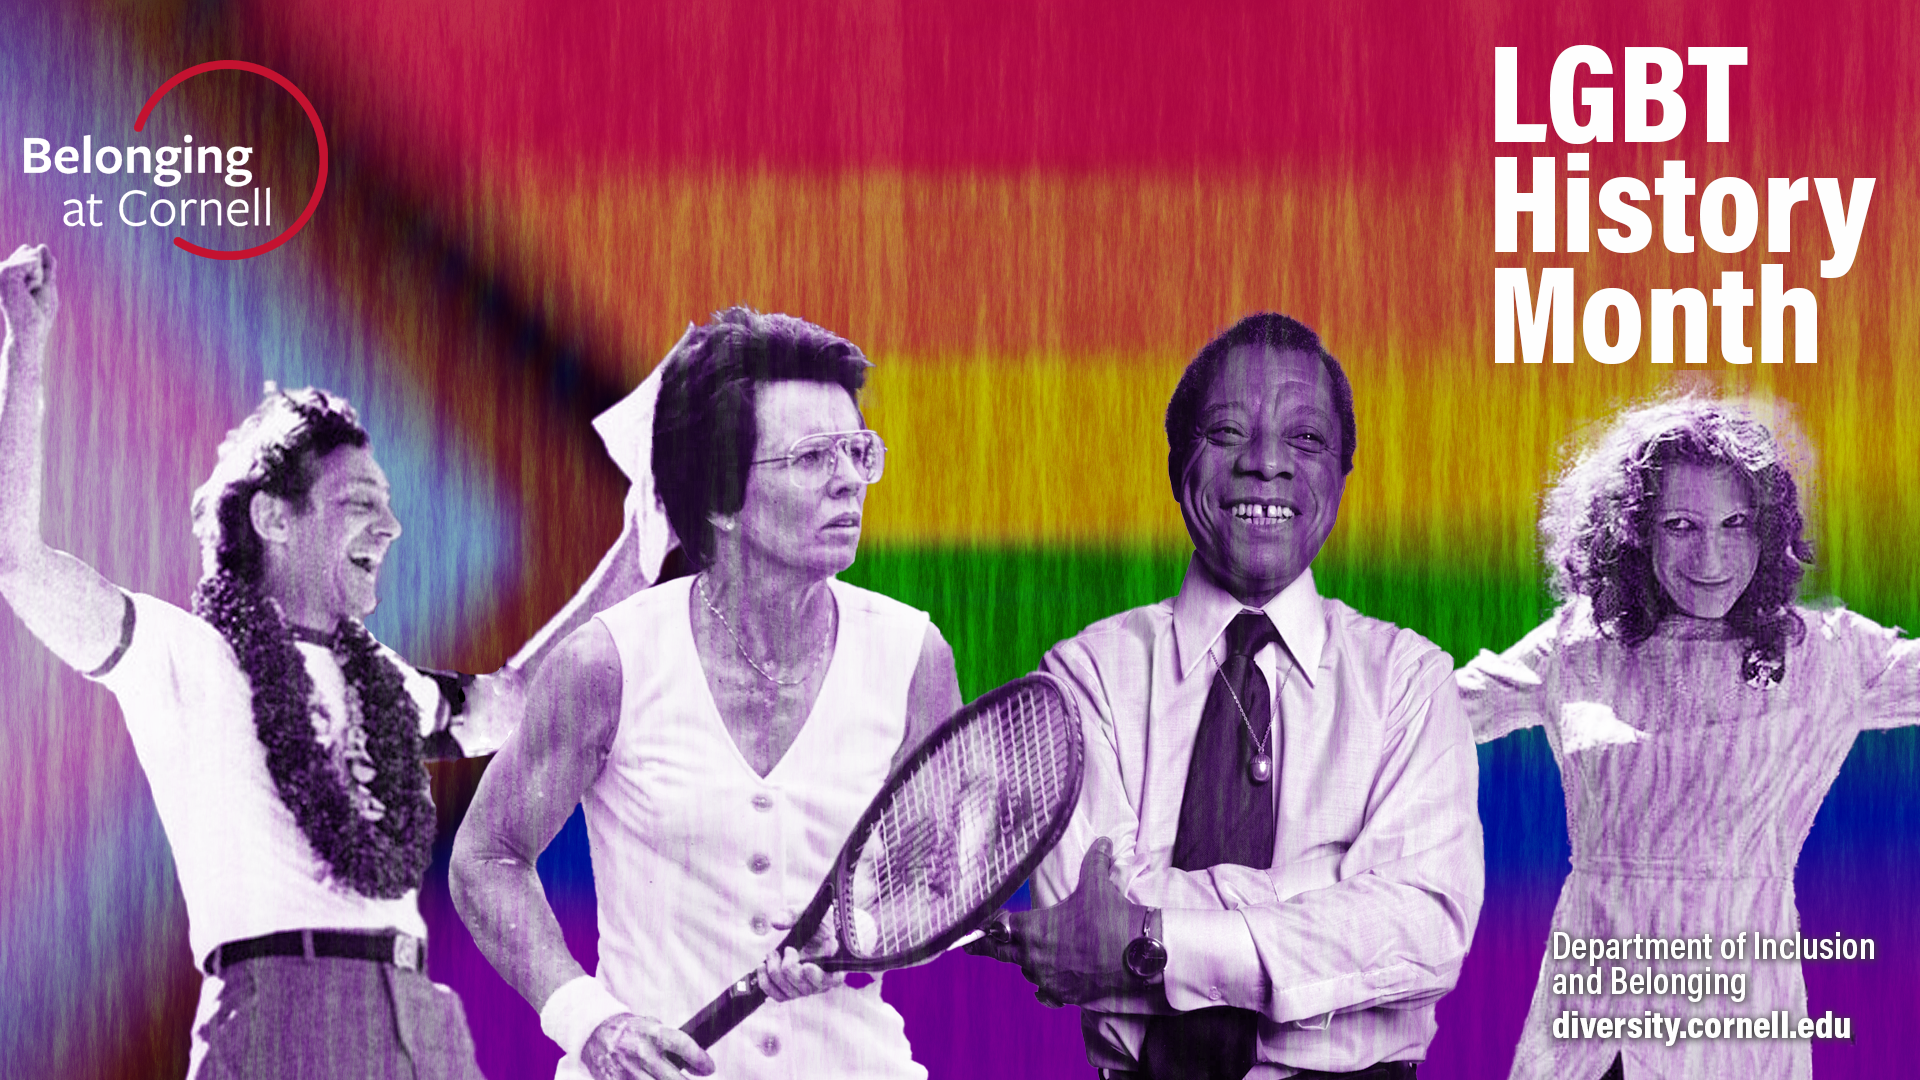 Zoom background visual for LGBT History Month featuring four historical figures- Harvey Milk, Billie Jean King, James Baldwin, and Sylvia Rivera